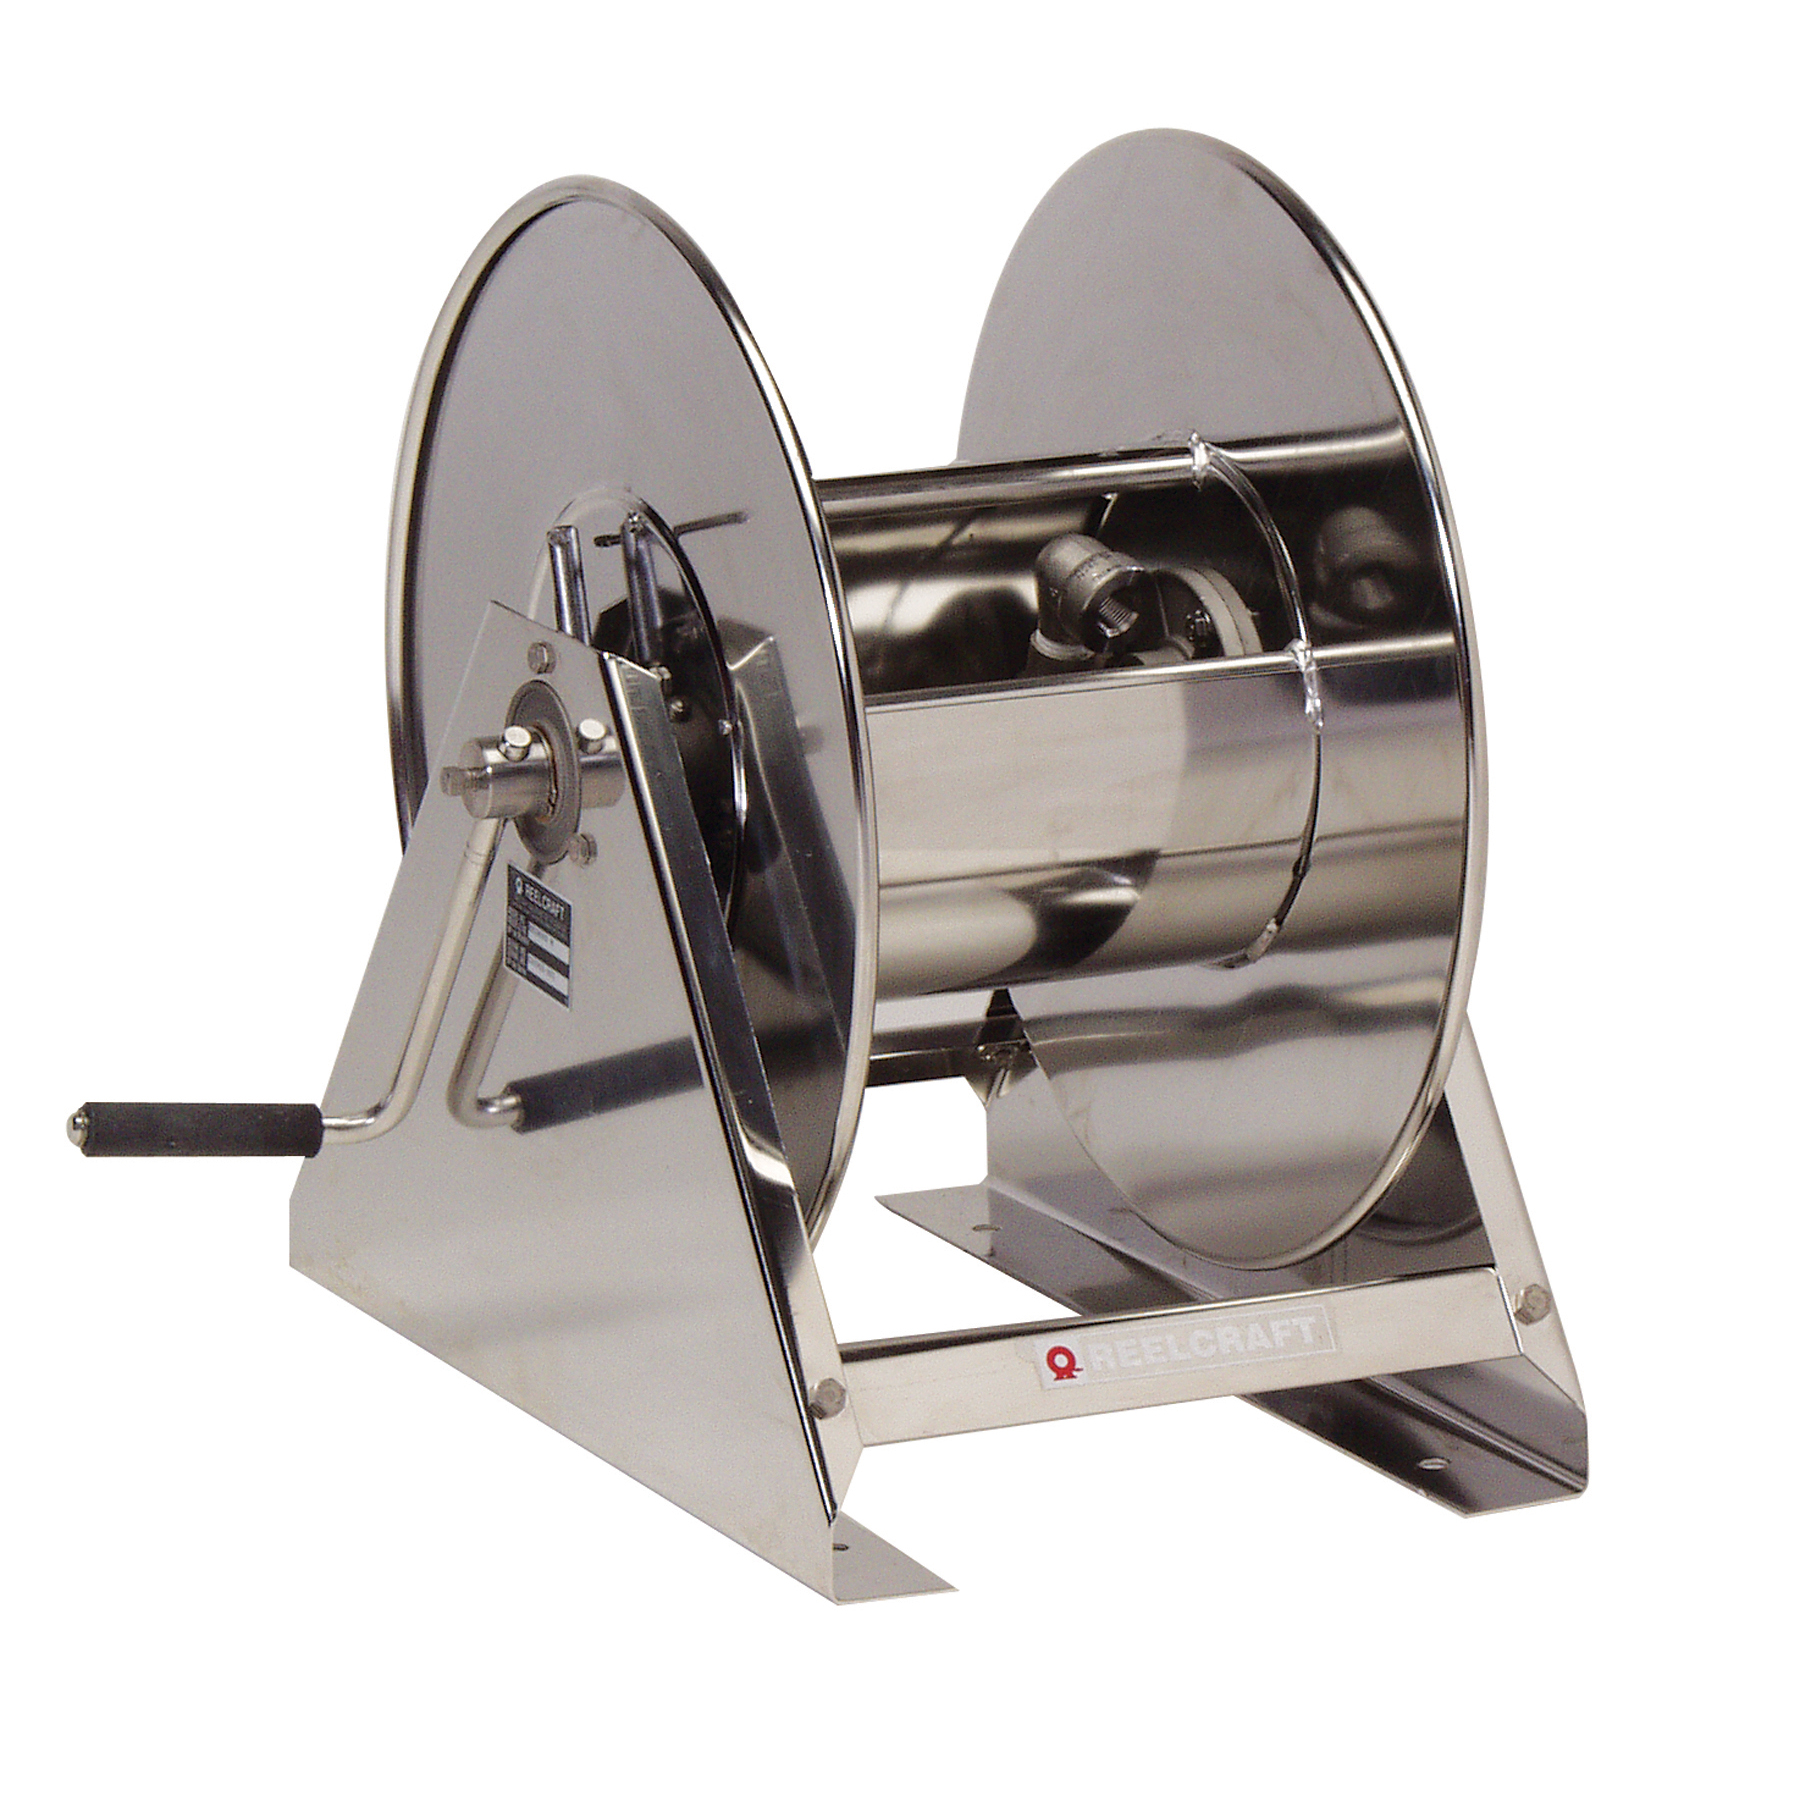 Reelcraft HS18000 M 0.5 in. x 200 ft. Stainless Steel 3000 PSI Oil Without Hose Reel